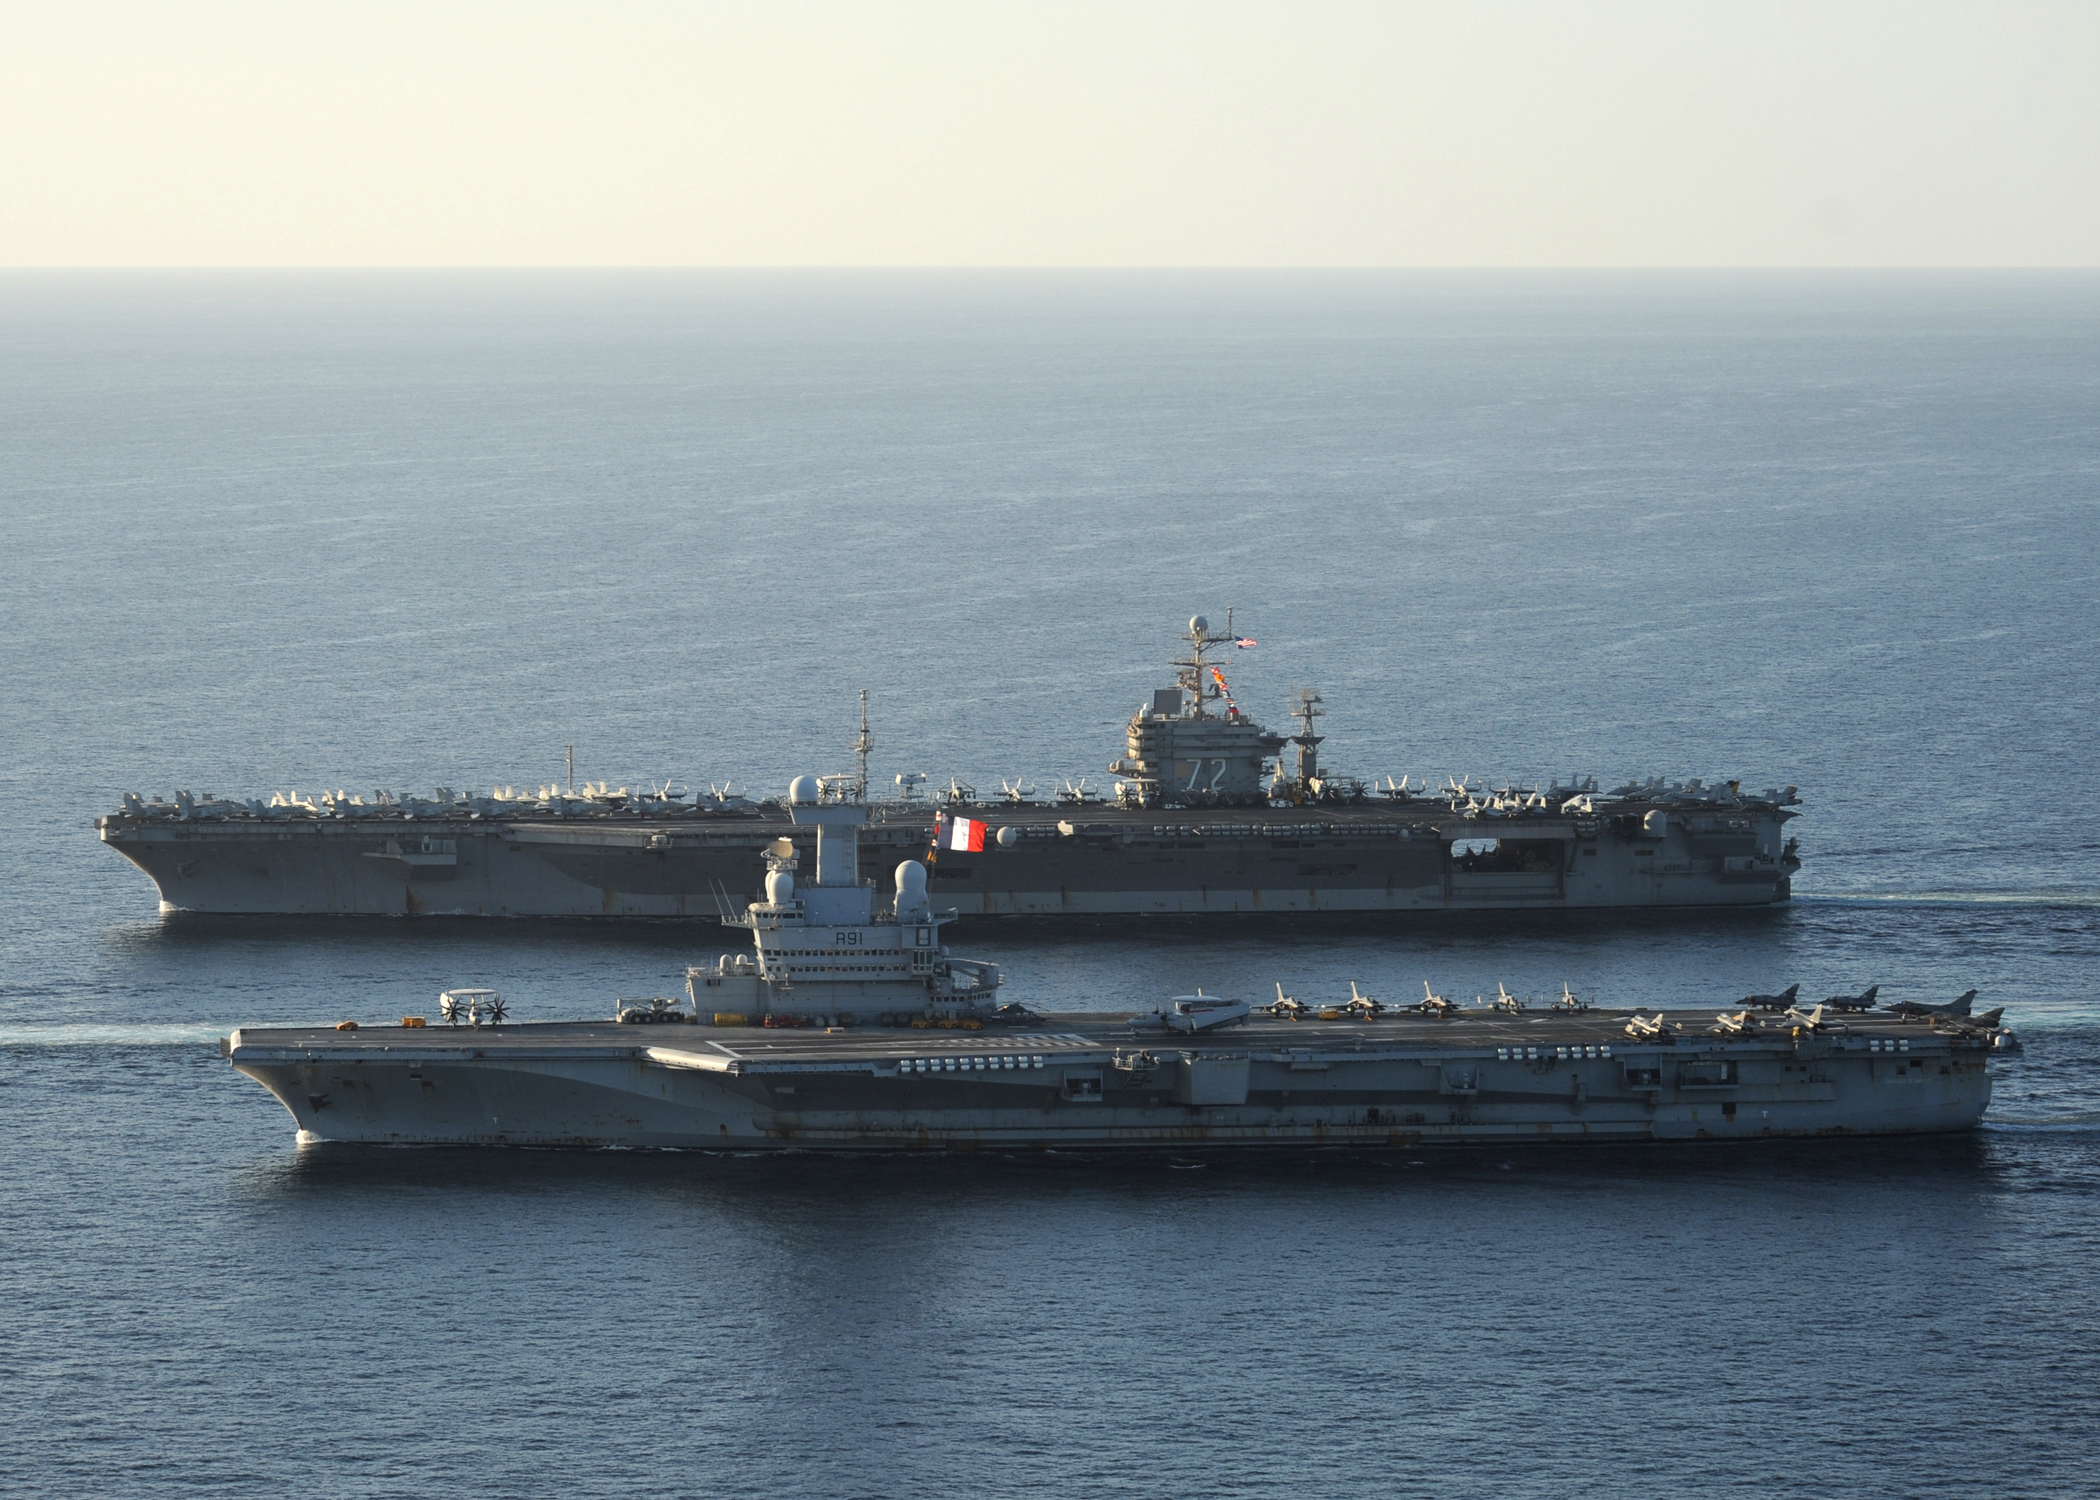 US_Navy_101210-N-1261P-028_The_aircraft_carrier_USS_Abraham_Lincoln_%28CVN_72%29%2C_back%2C_and_the_French_navy_aircraft_carrier_Charles_De_Gaulle_%28R_91%29_a.jpg